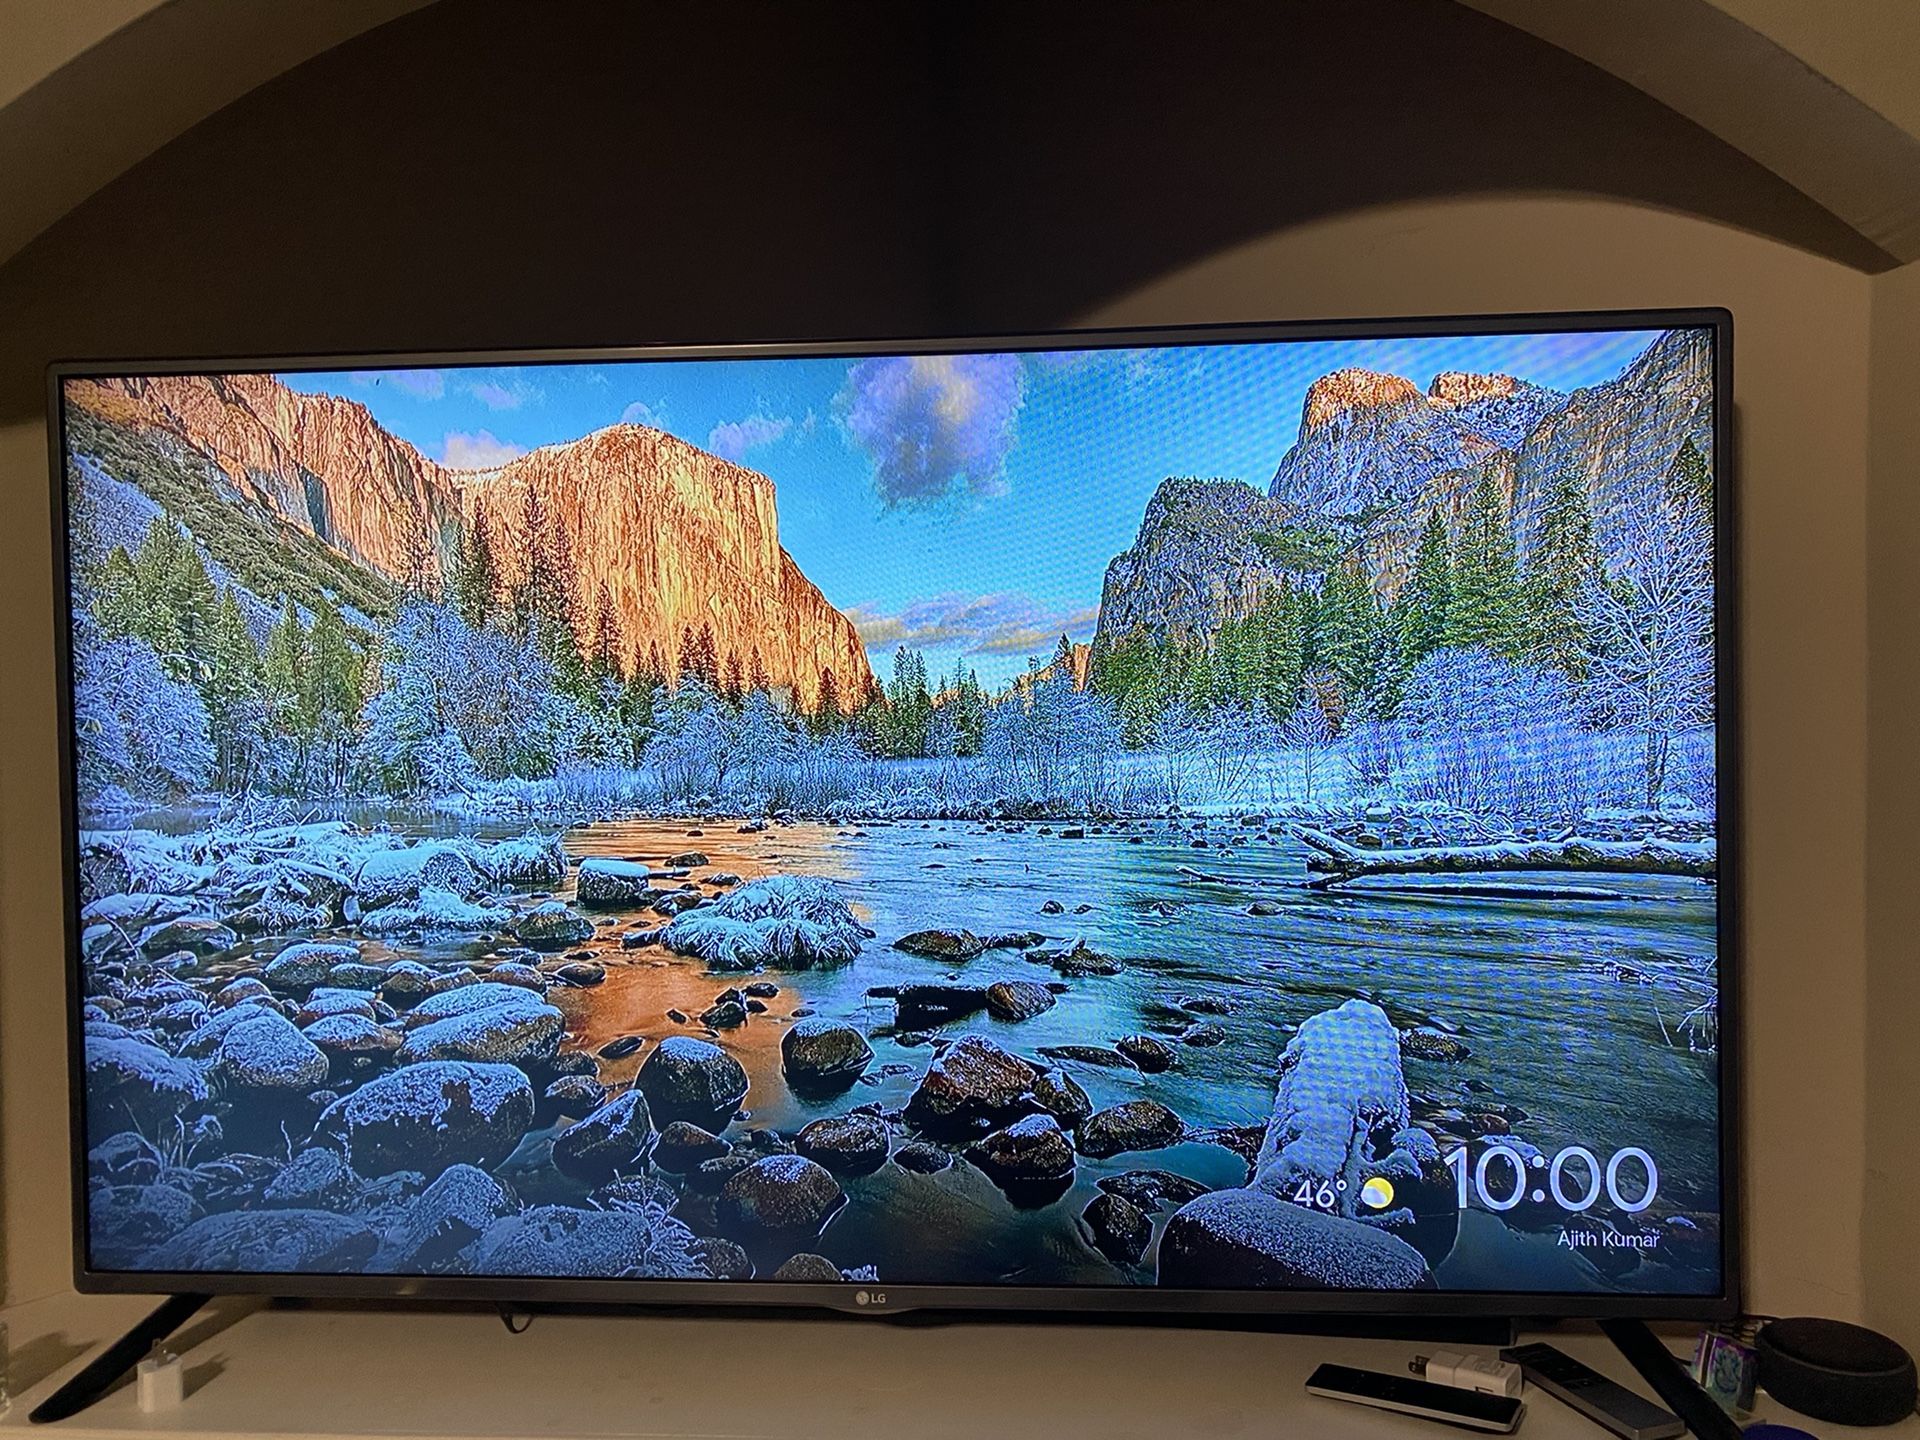 LG LED TV 55in with Remote in Excellent Condition!!